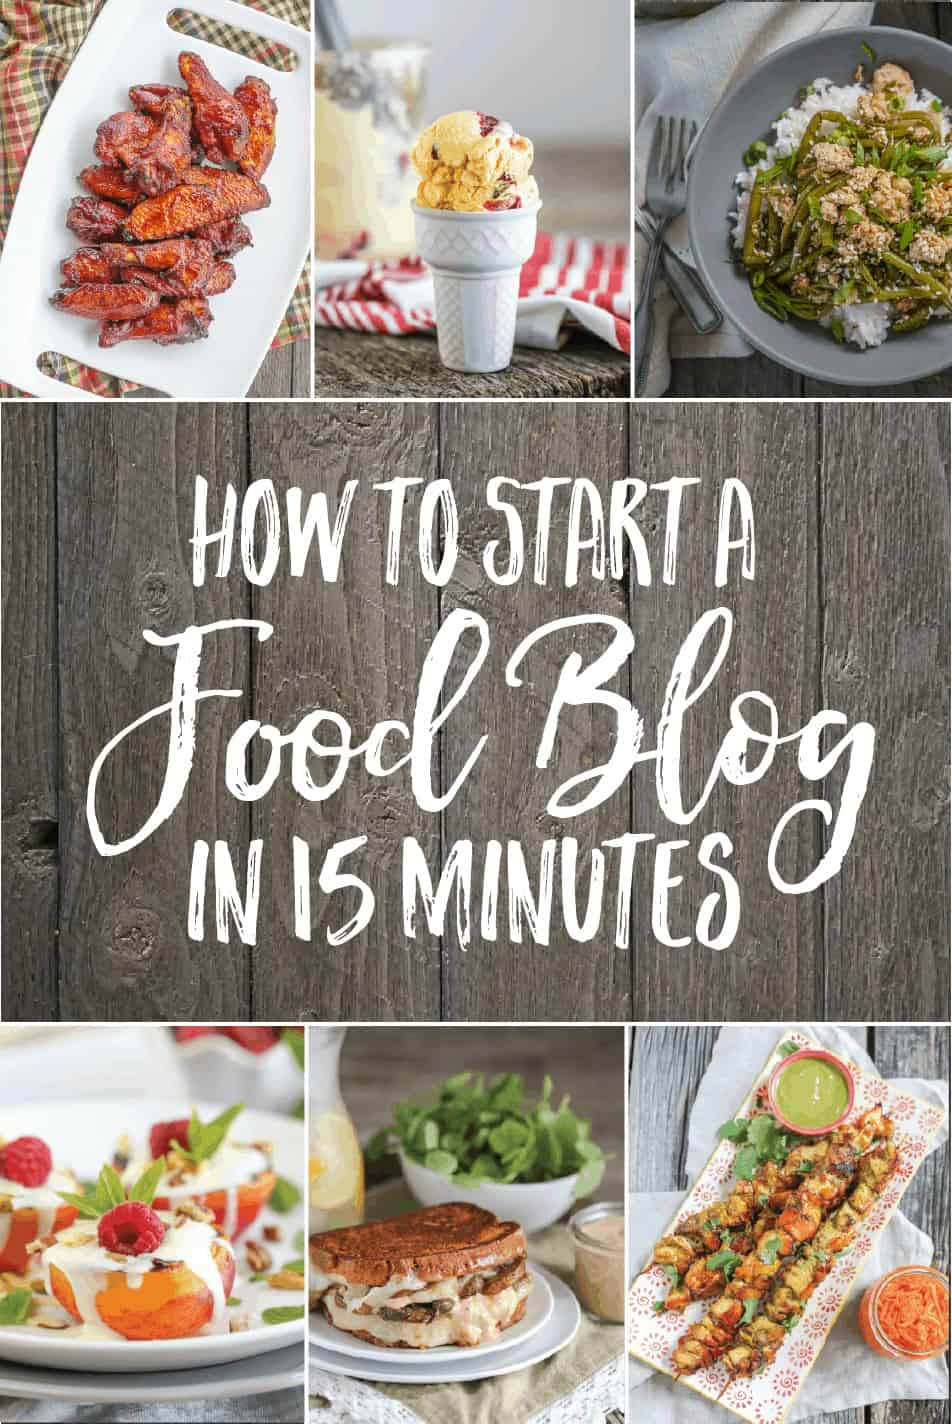 How to Start a Food Blog in 15 Minutes